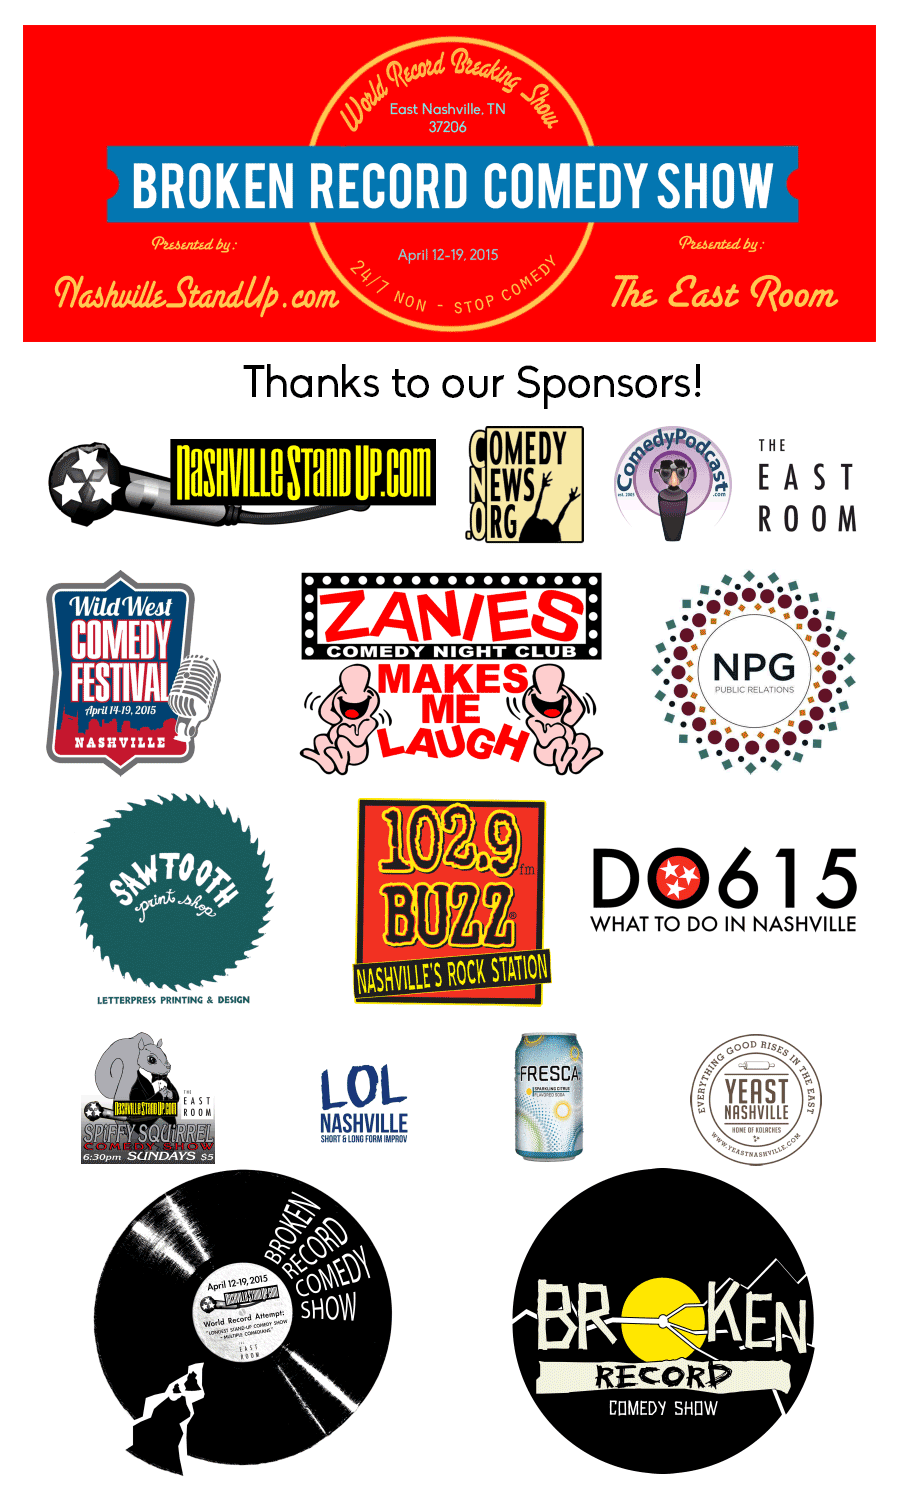 thanks to all of our sponsors!